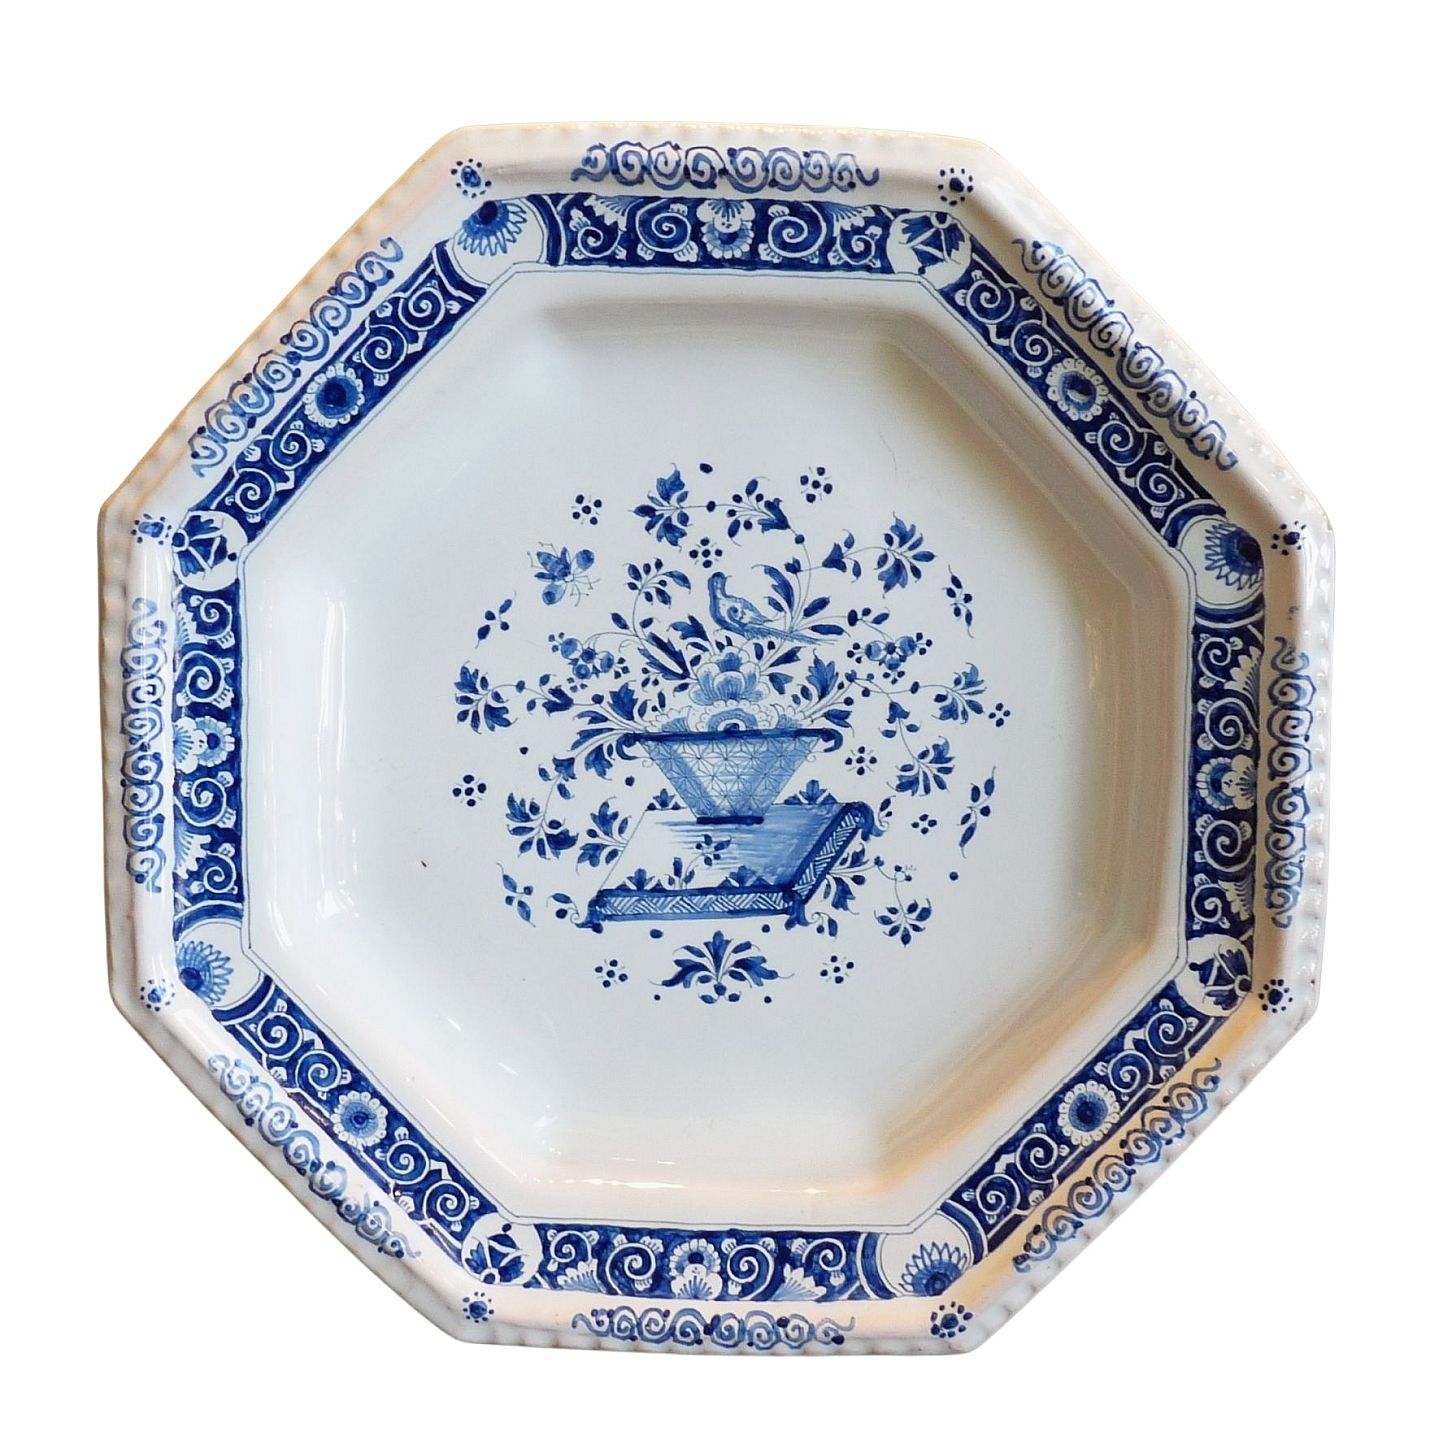 baroque-faience-strasbourg-faience-charger-18th-century